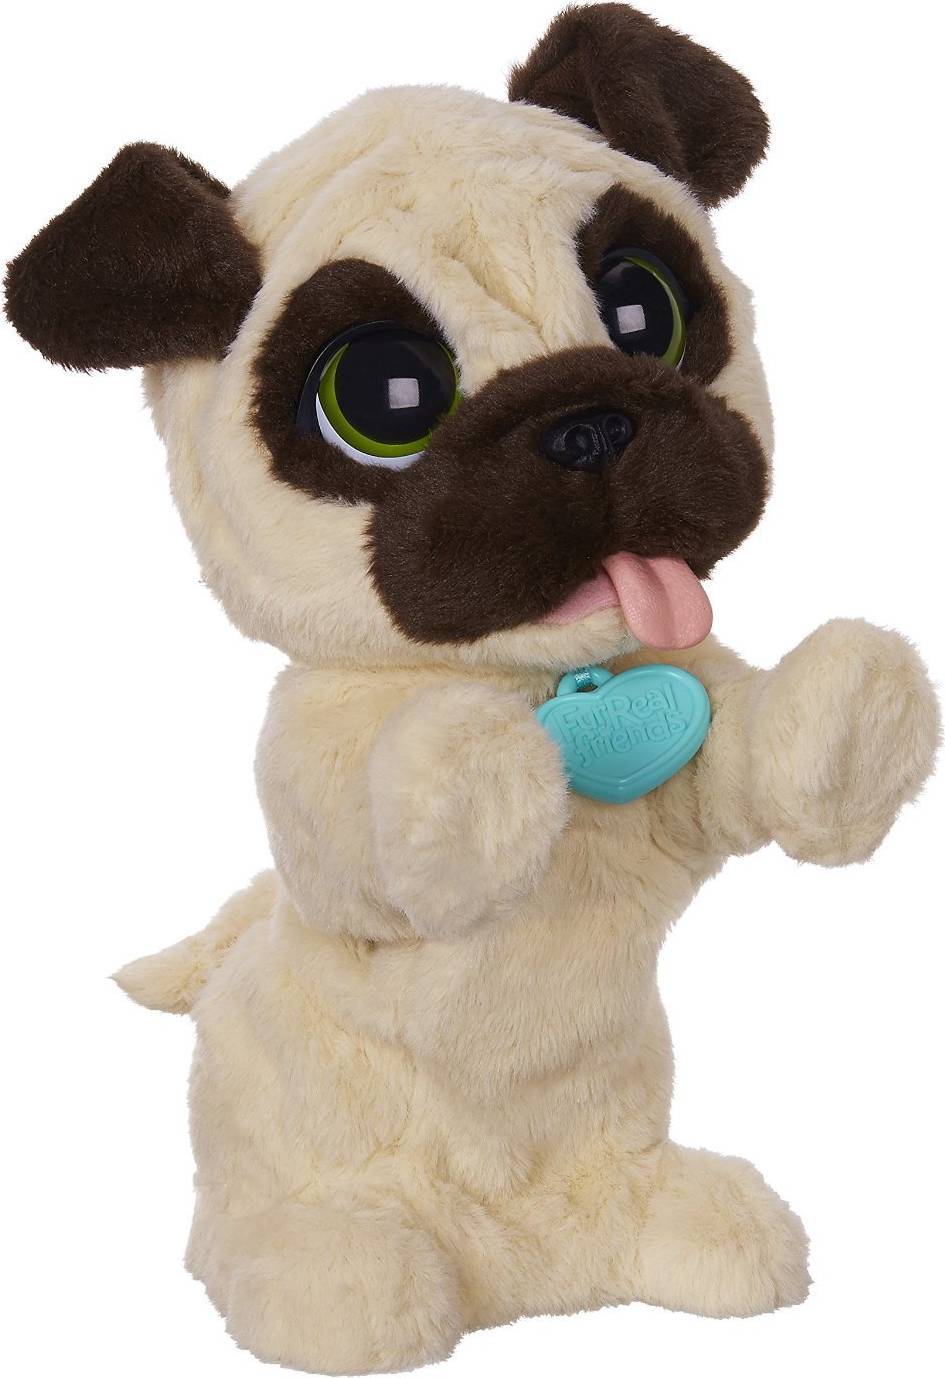 2011 Hasbro FurReal Friends 13" Bouncy My Happy to See Me Puppy Dog Tested A0514 for sale online 